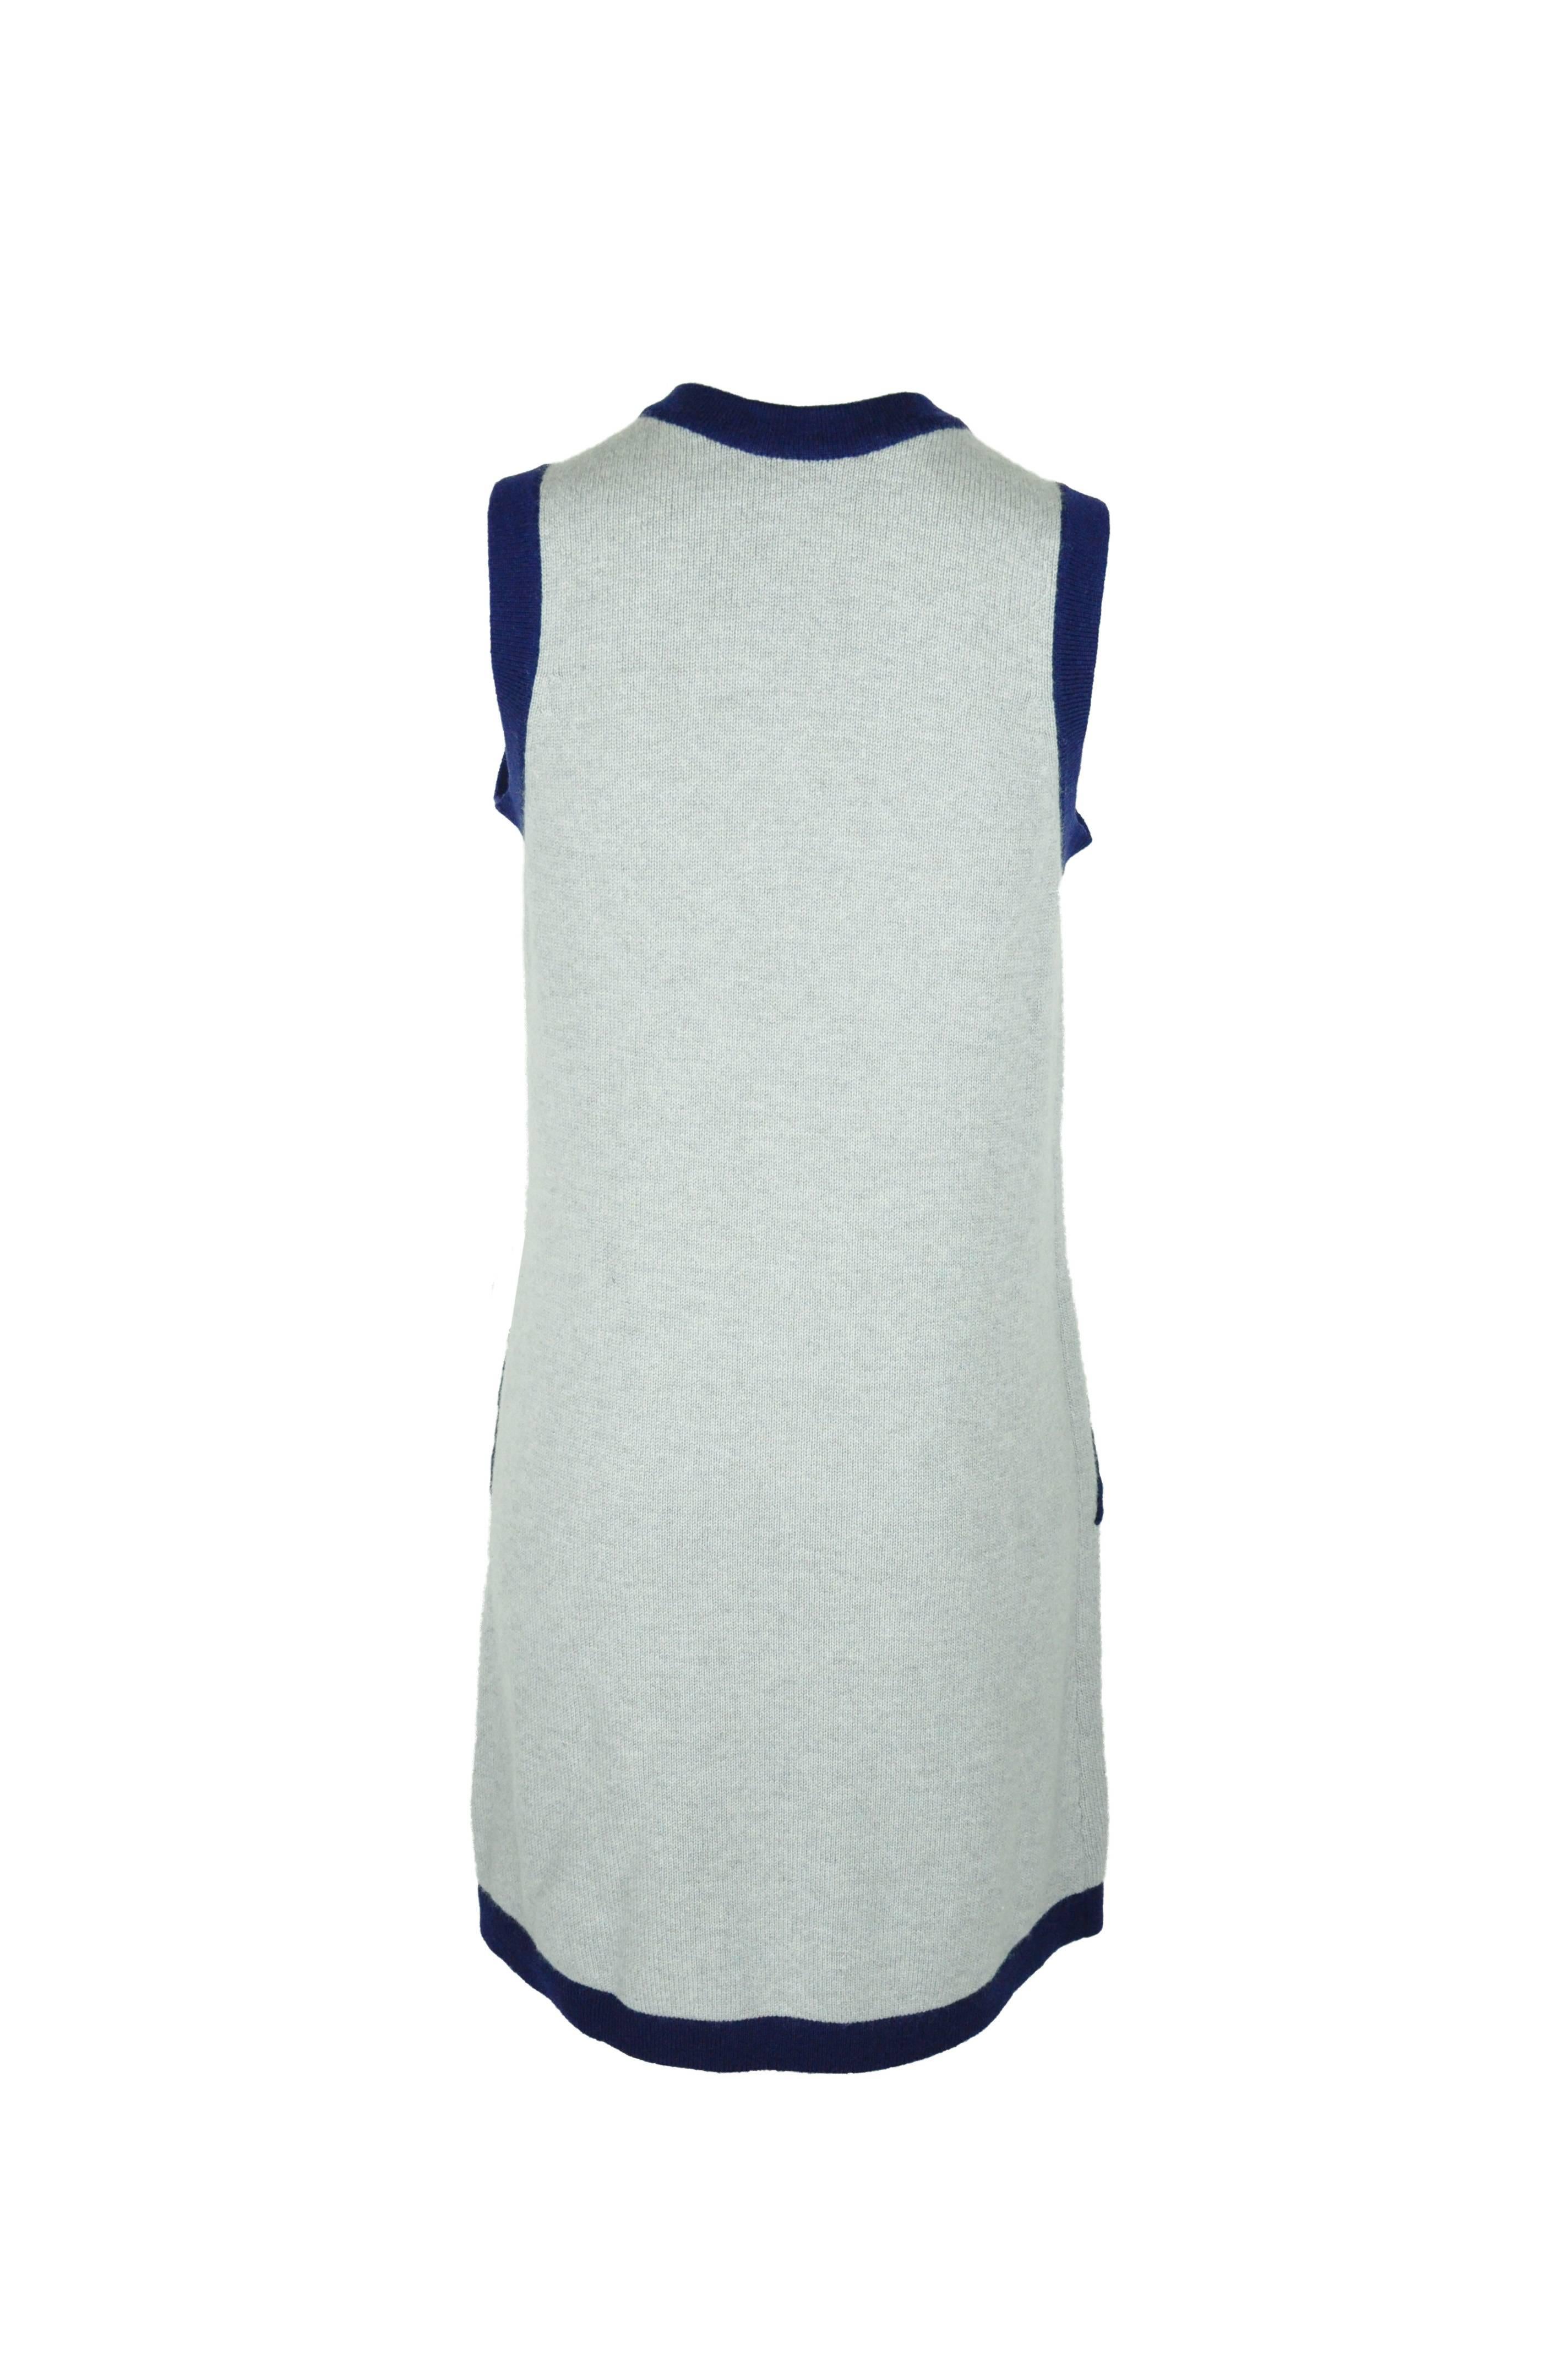 Chanel 2015 S/S Runway Collection Sleeveless Cashmere Knit Dress FR36 In New Condition In Hong Kong, Hong Kong